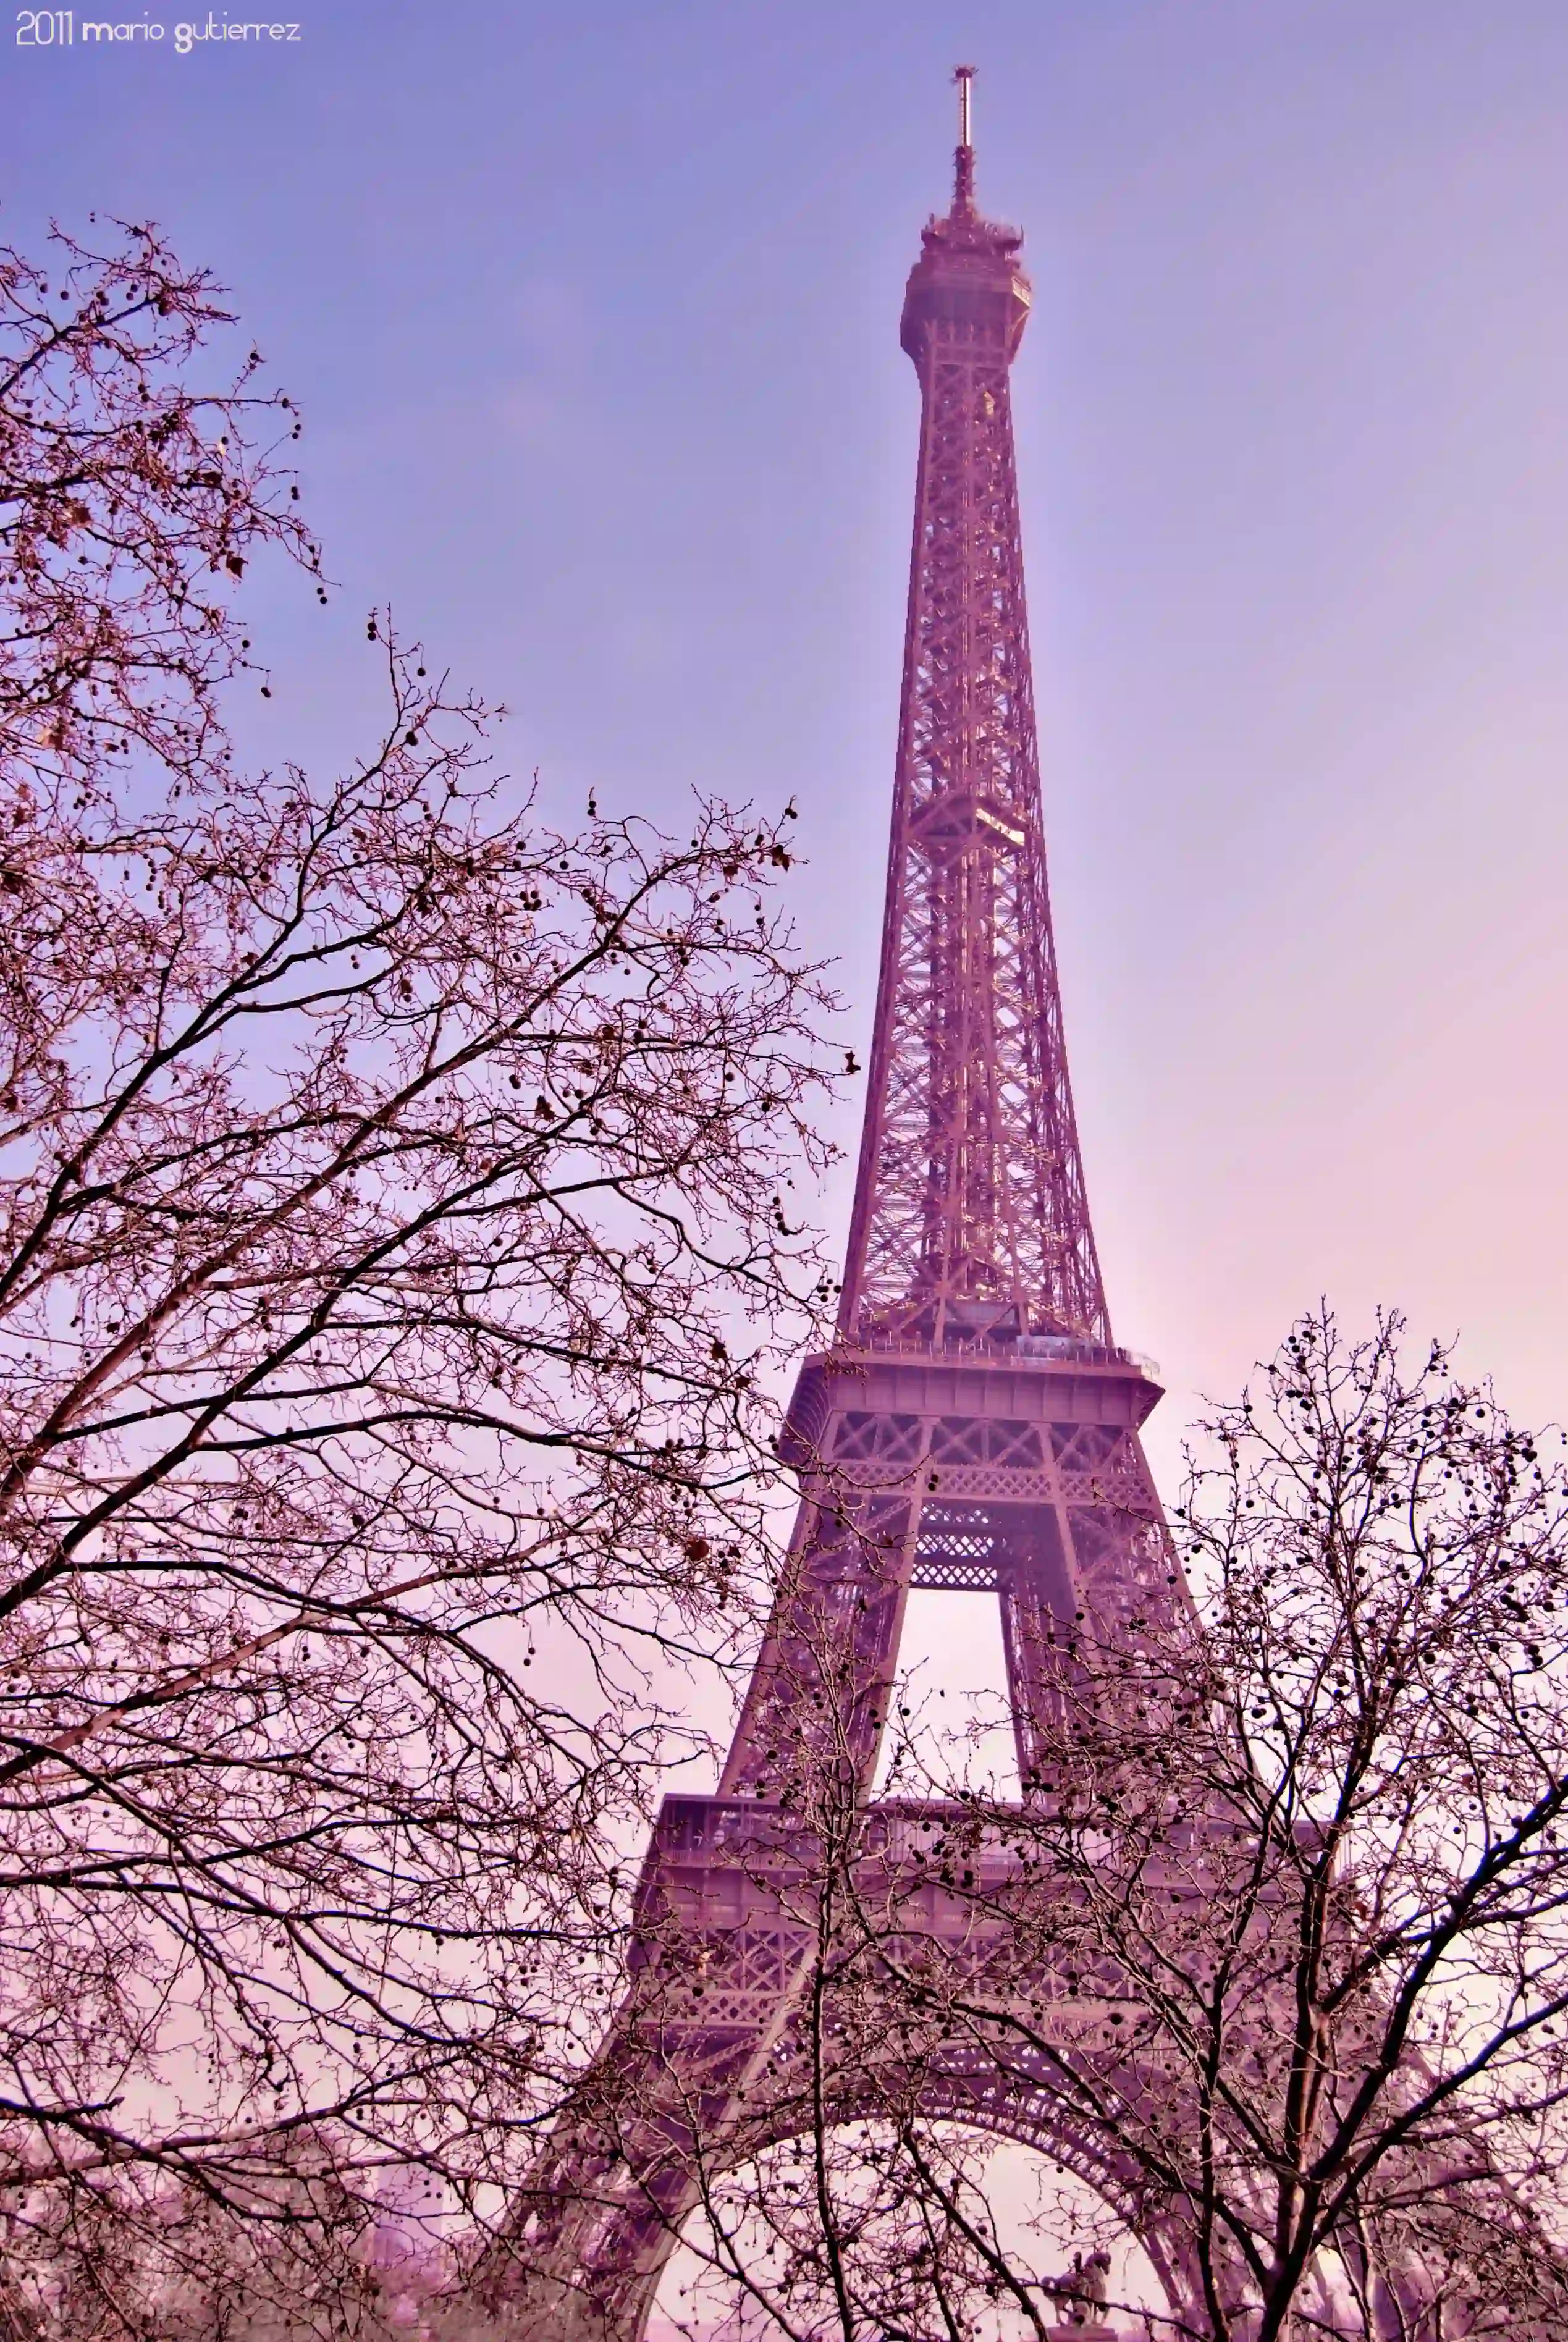 At sunset, March 2011. Eiffel Tower in Paris, France.